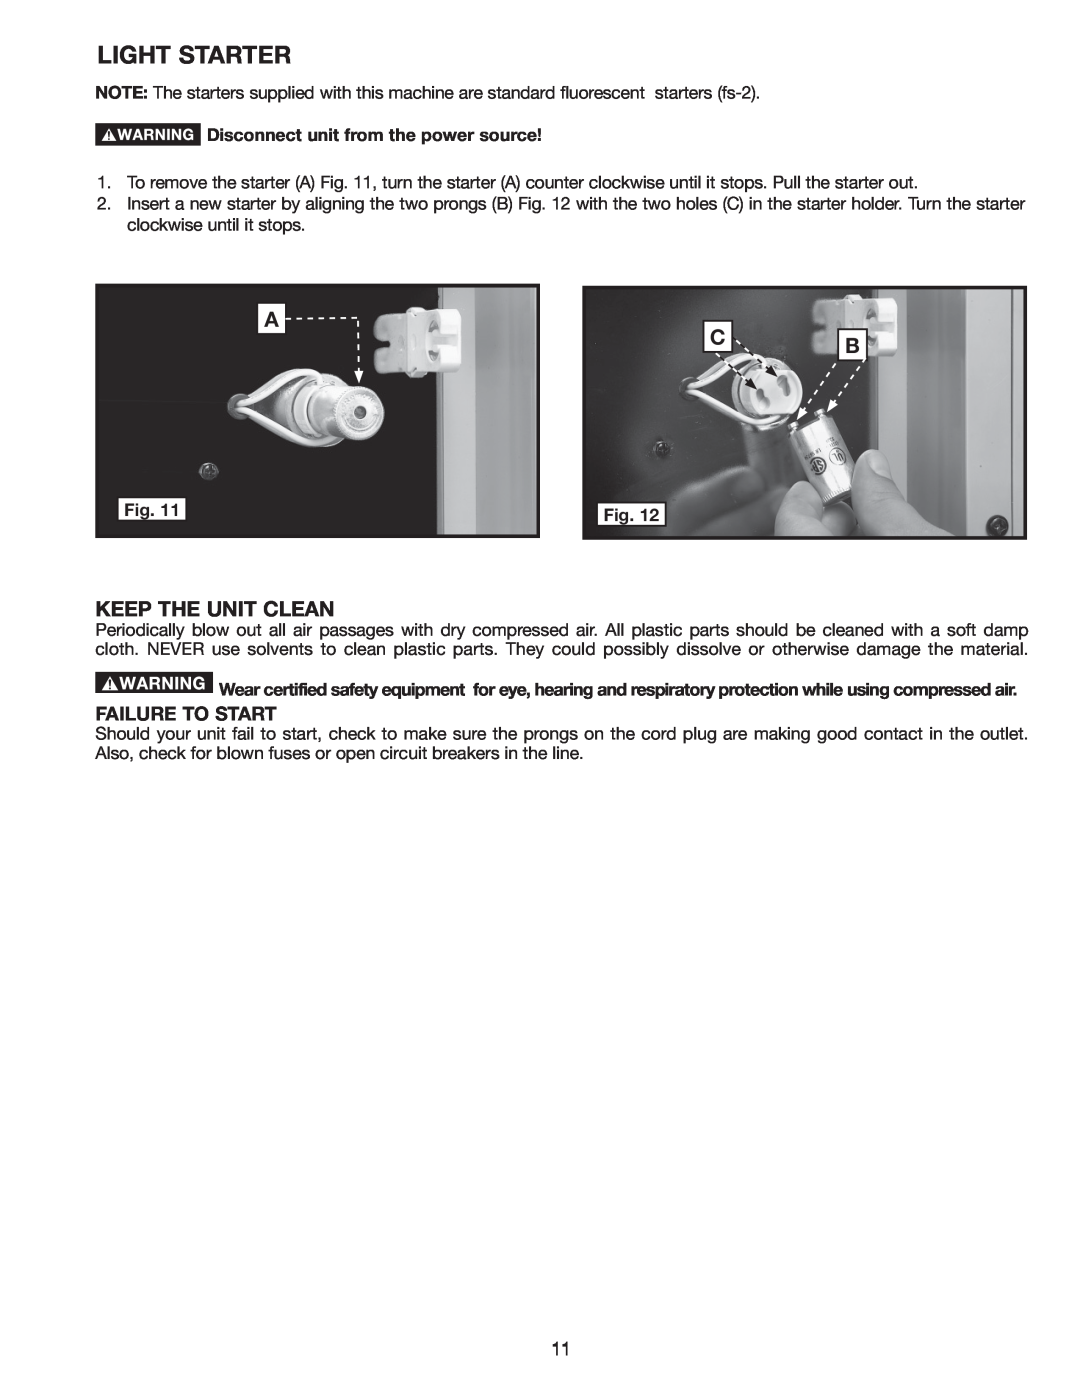 Delta AP-100 instruction manual Light Starter, Keep The Unit Clean, Failure To Start, Disconnect unit from the power source 